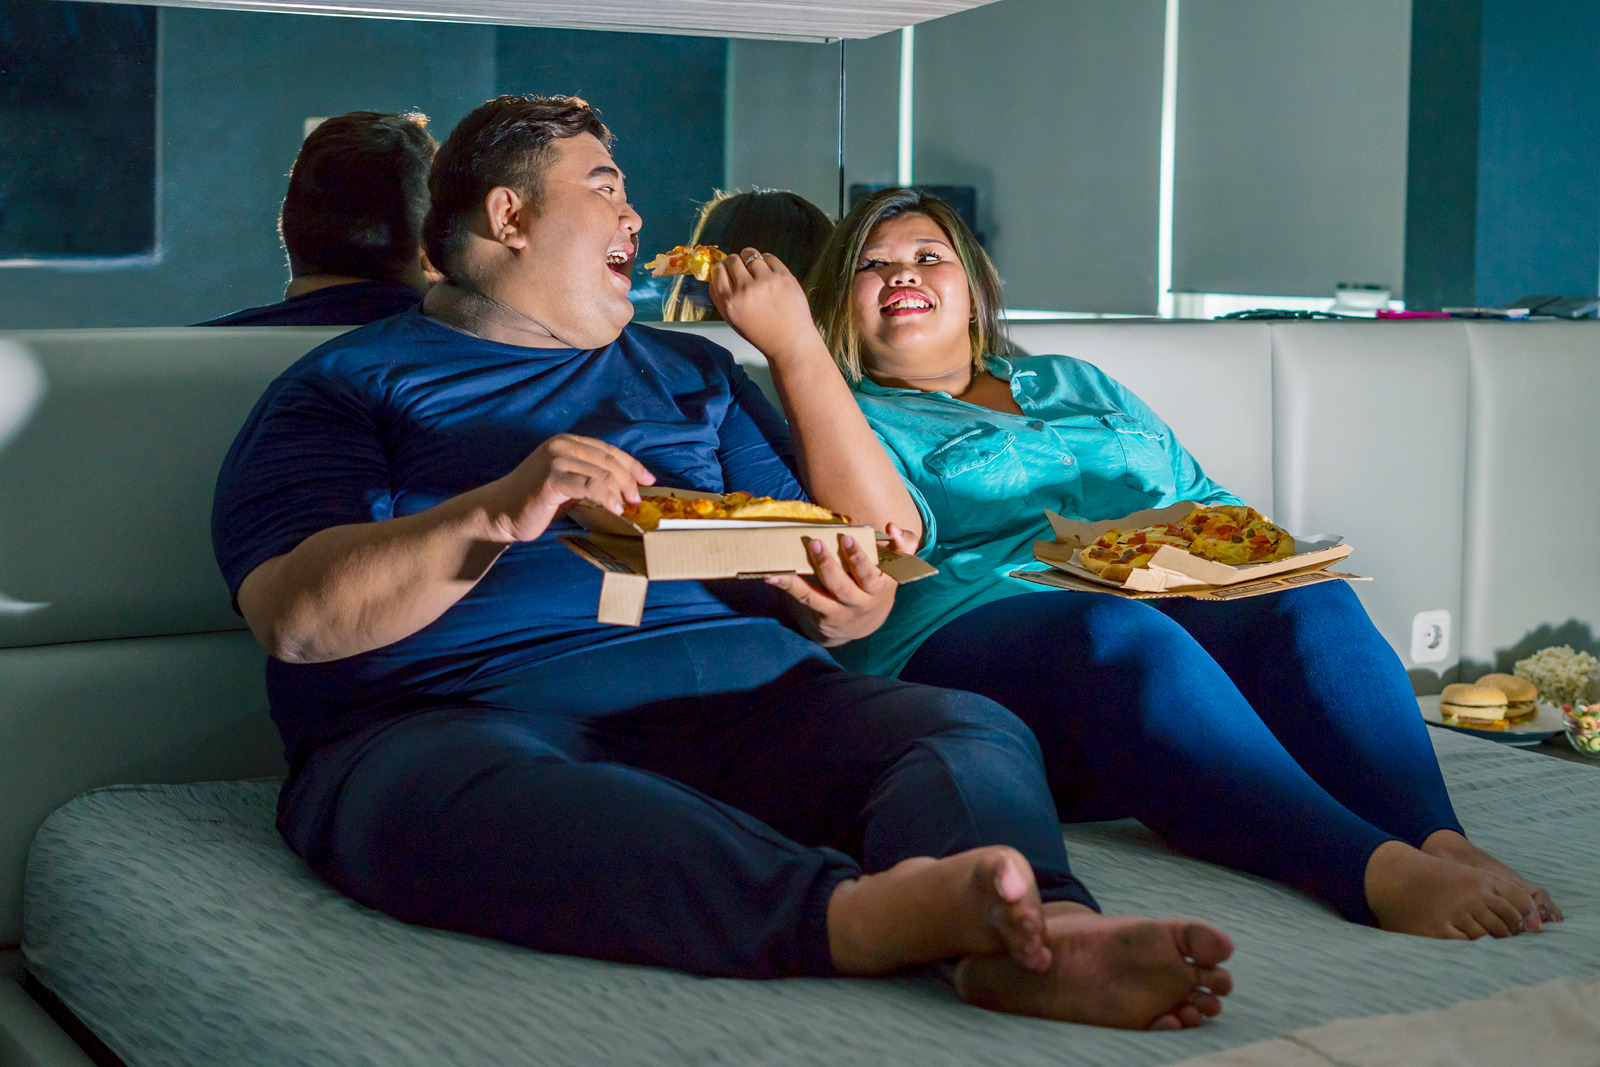  Obesity in Spain: What’s Causing the Epidemic & What Can We Do to Stop It?